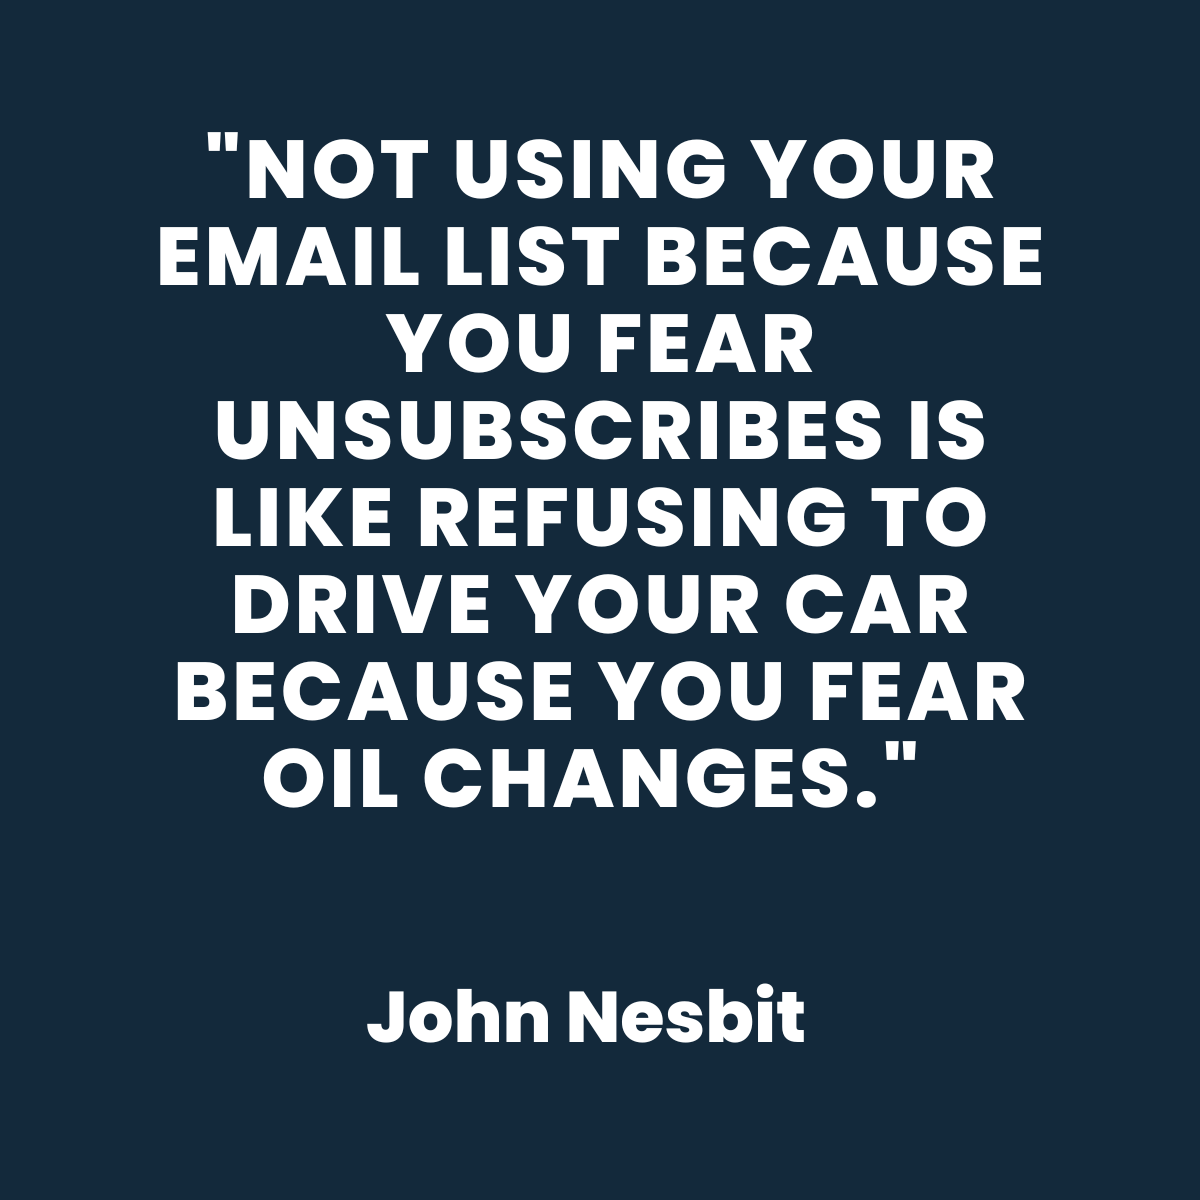 Don't let unsubscribes stop you from taking advantage of your email list. 

For more content go to TheCustomerFactory.com
 #TheCustomerFactory #marketing #Facebookads #newpatients #marketingtip #marketingdigital #UnsubscribesArePurifying #NavigateToSuccess #EmailListEmpowerment